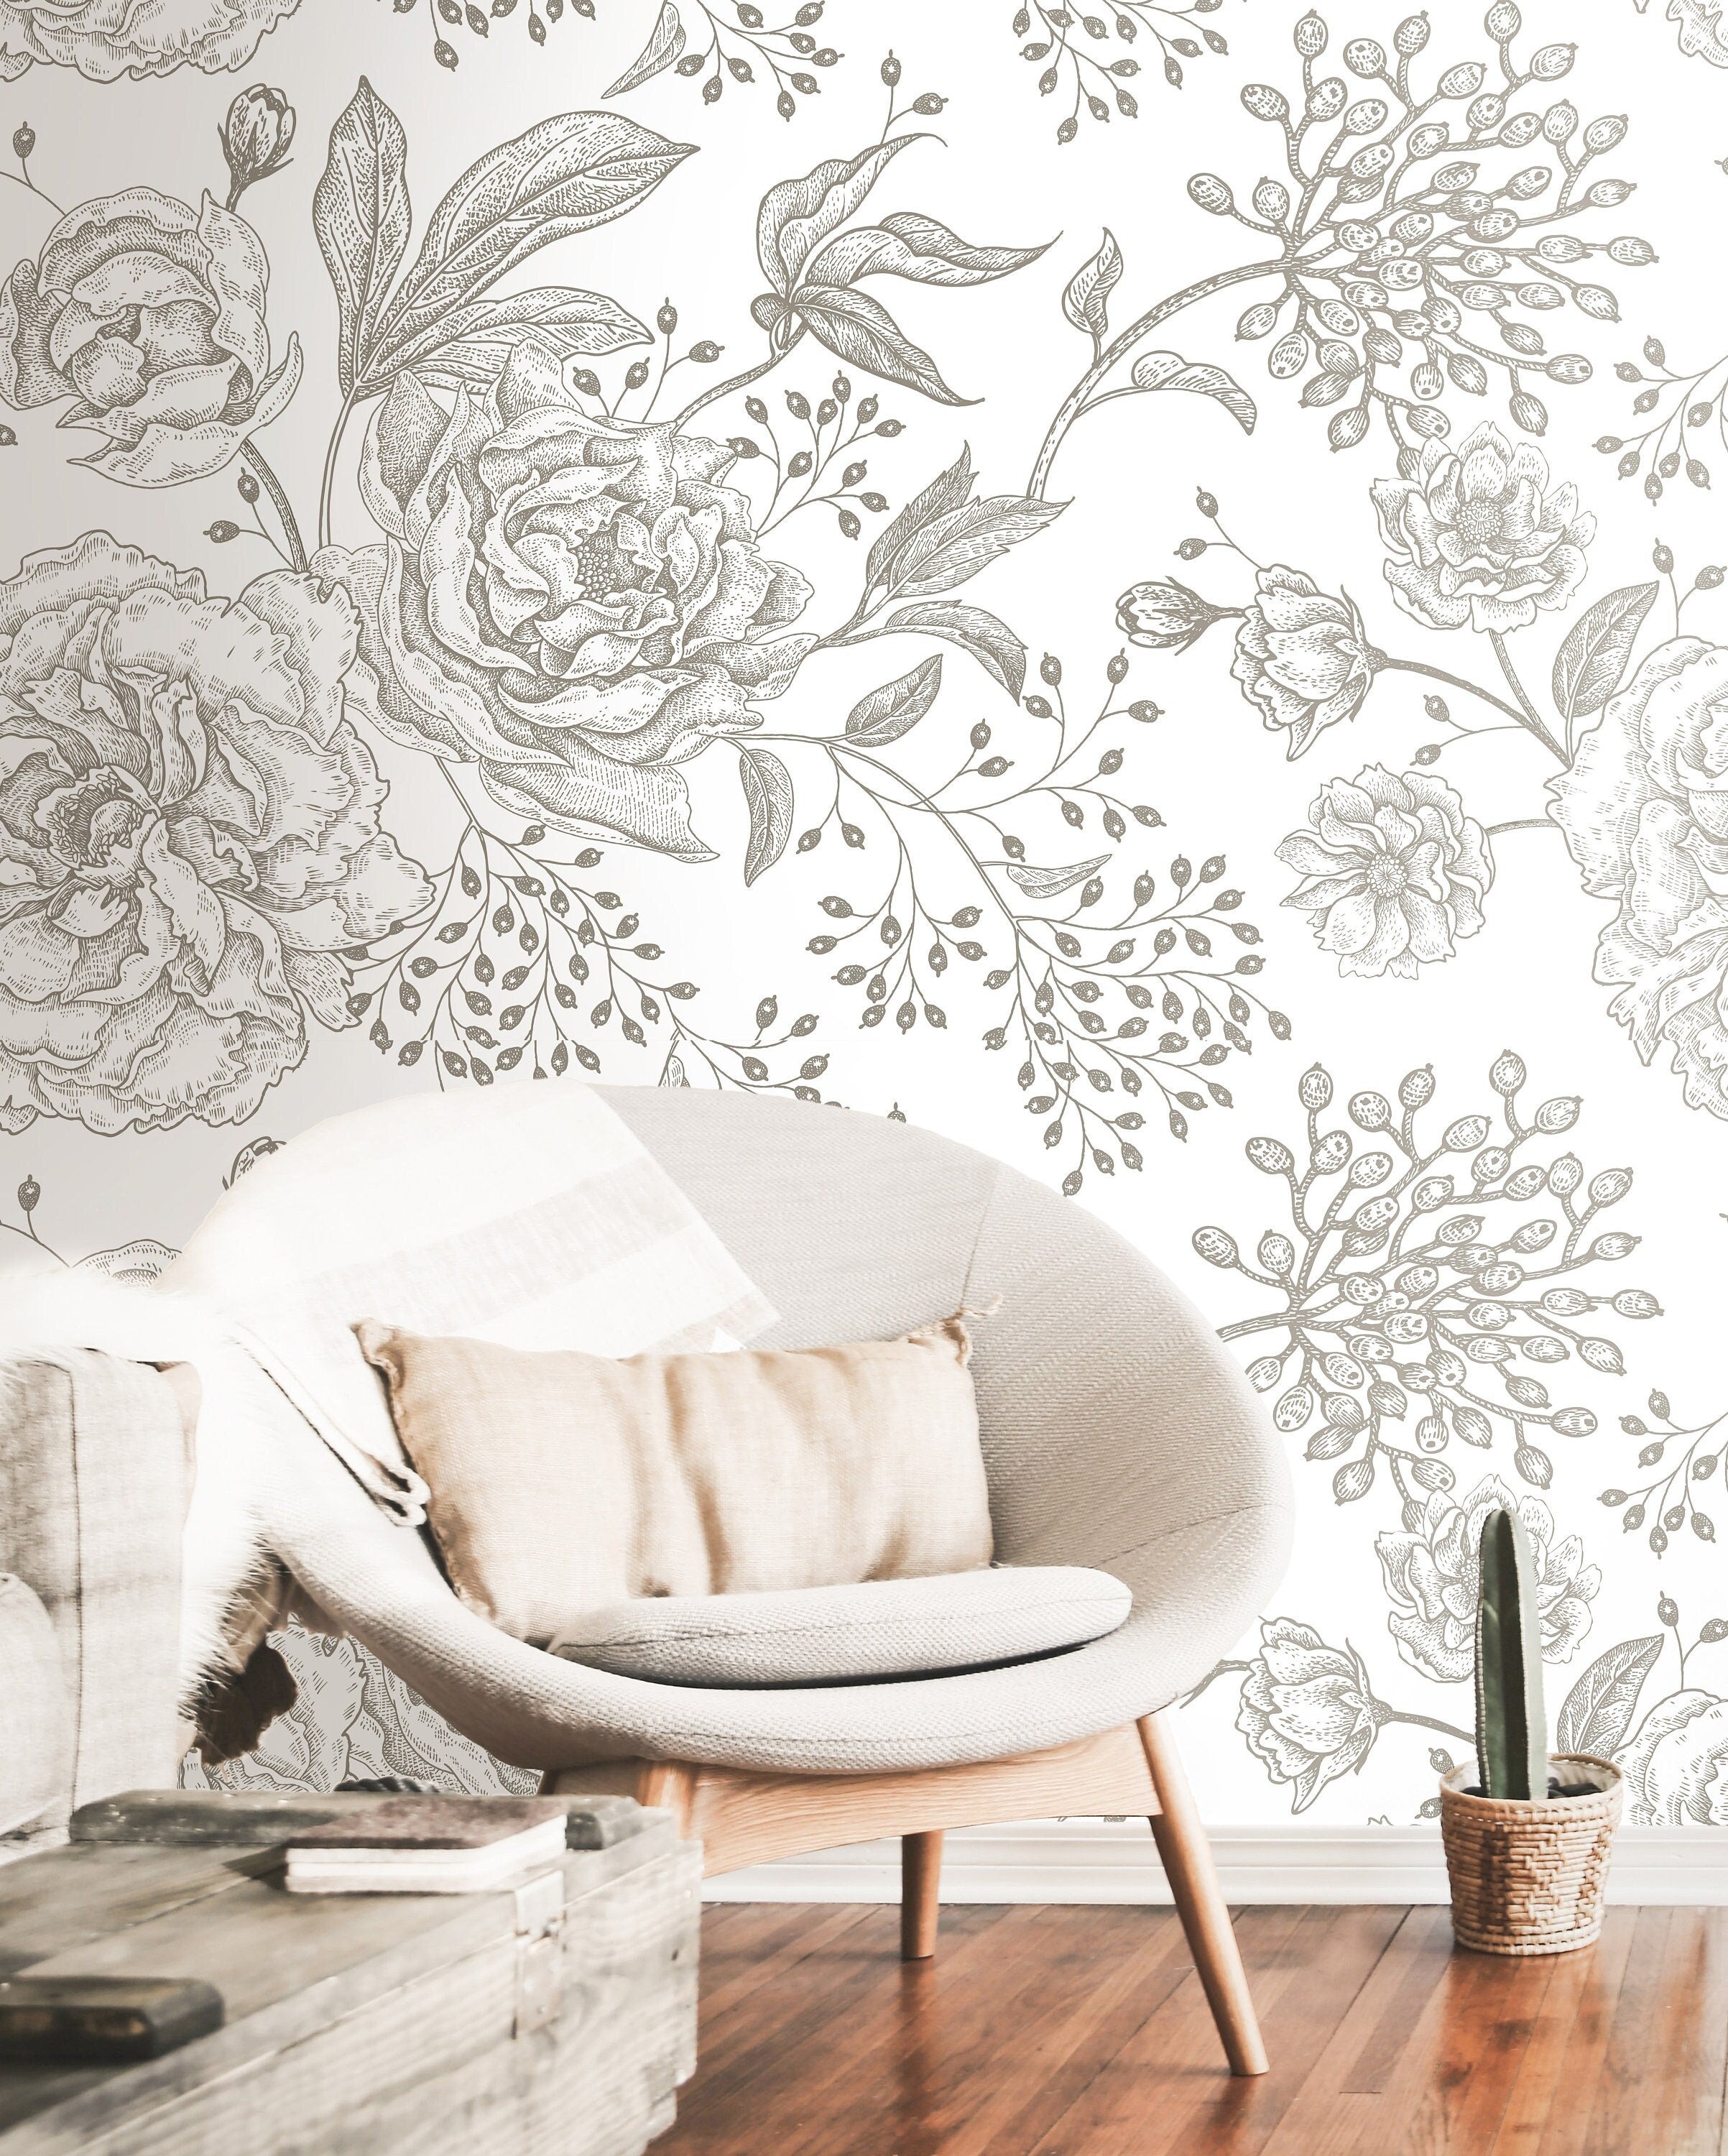 Big Floral Removable Peel and Stick Wallpaper